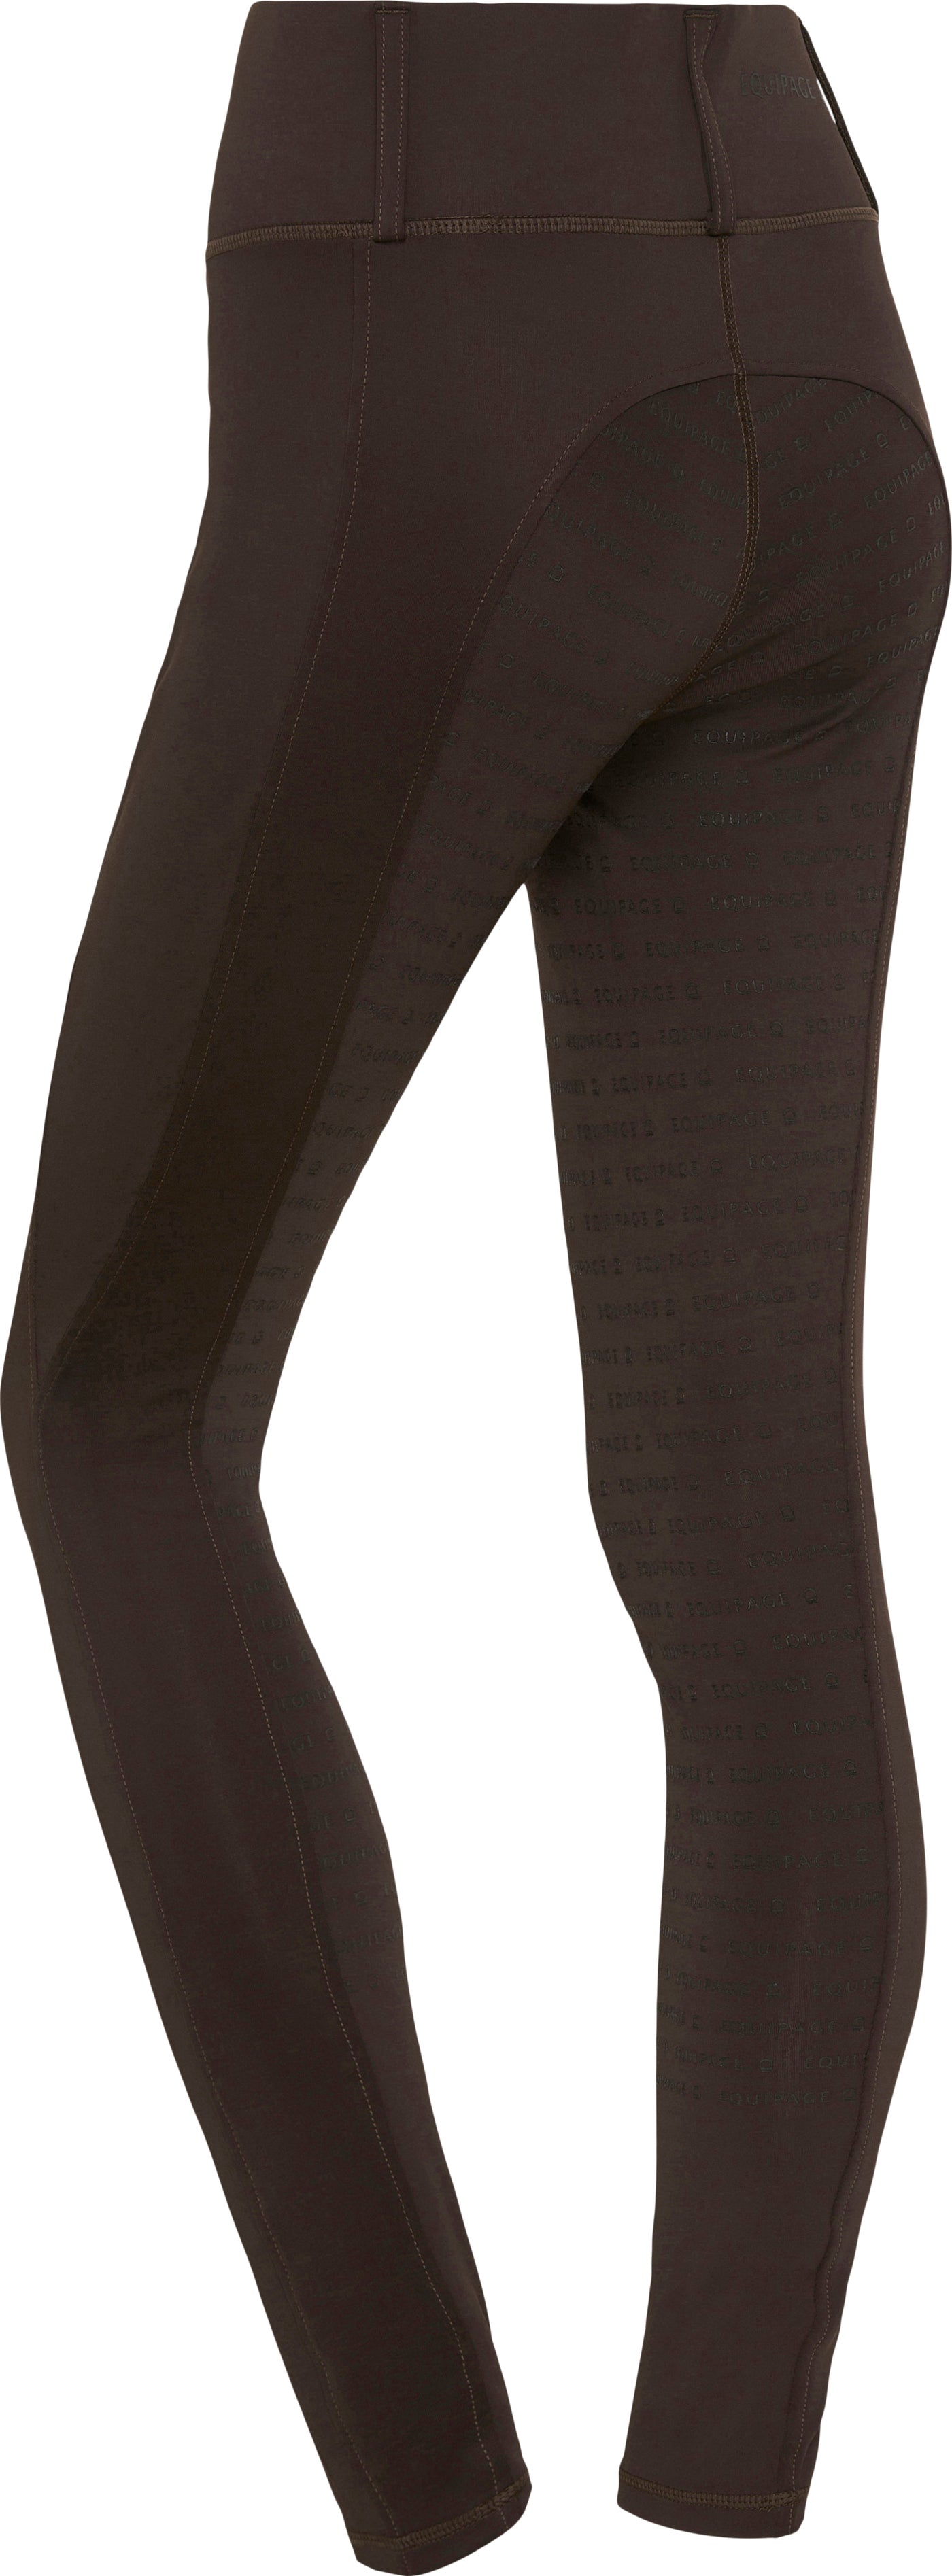 Equipage Kendra Tights